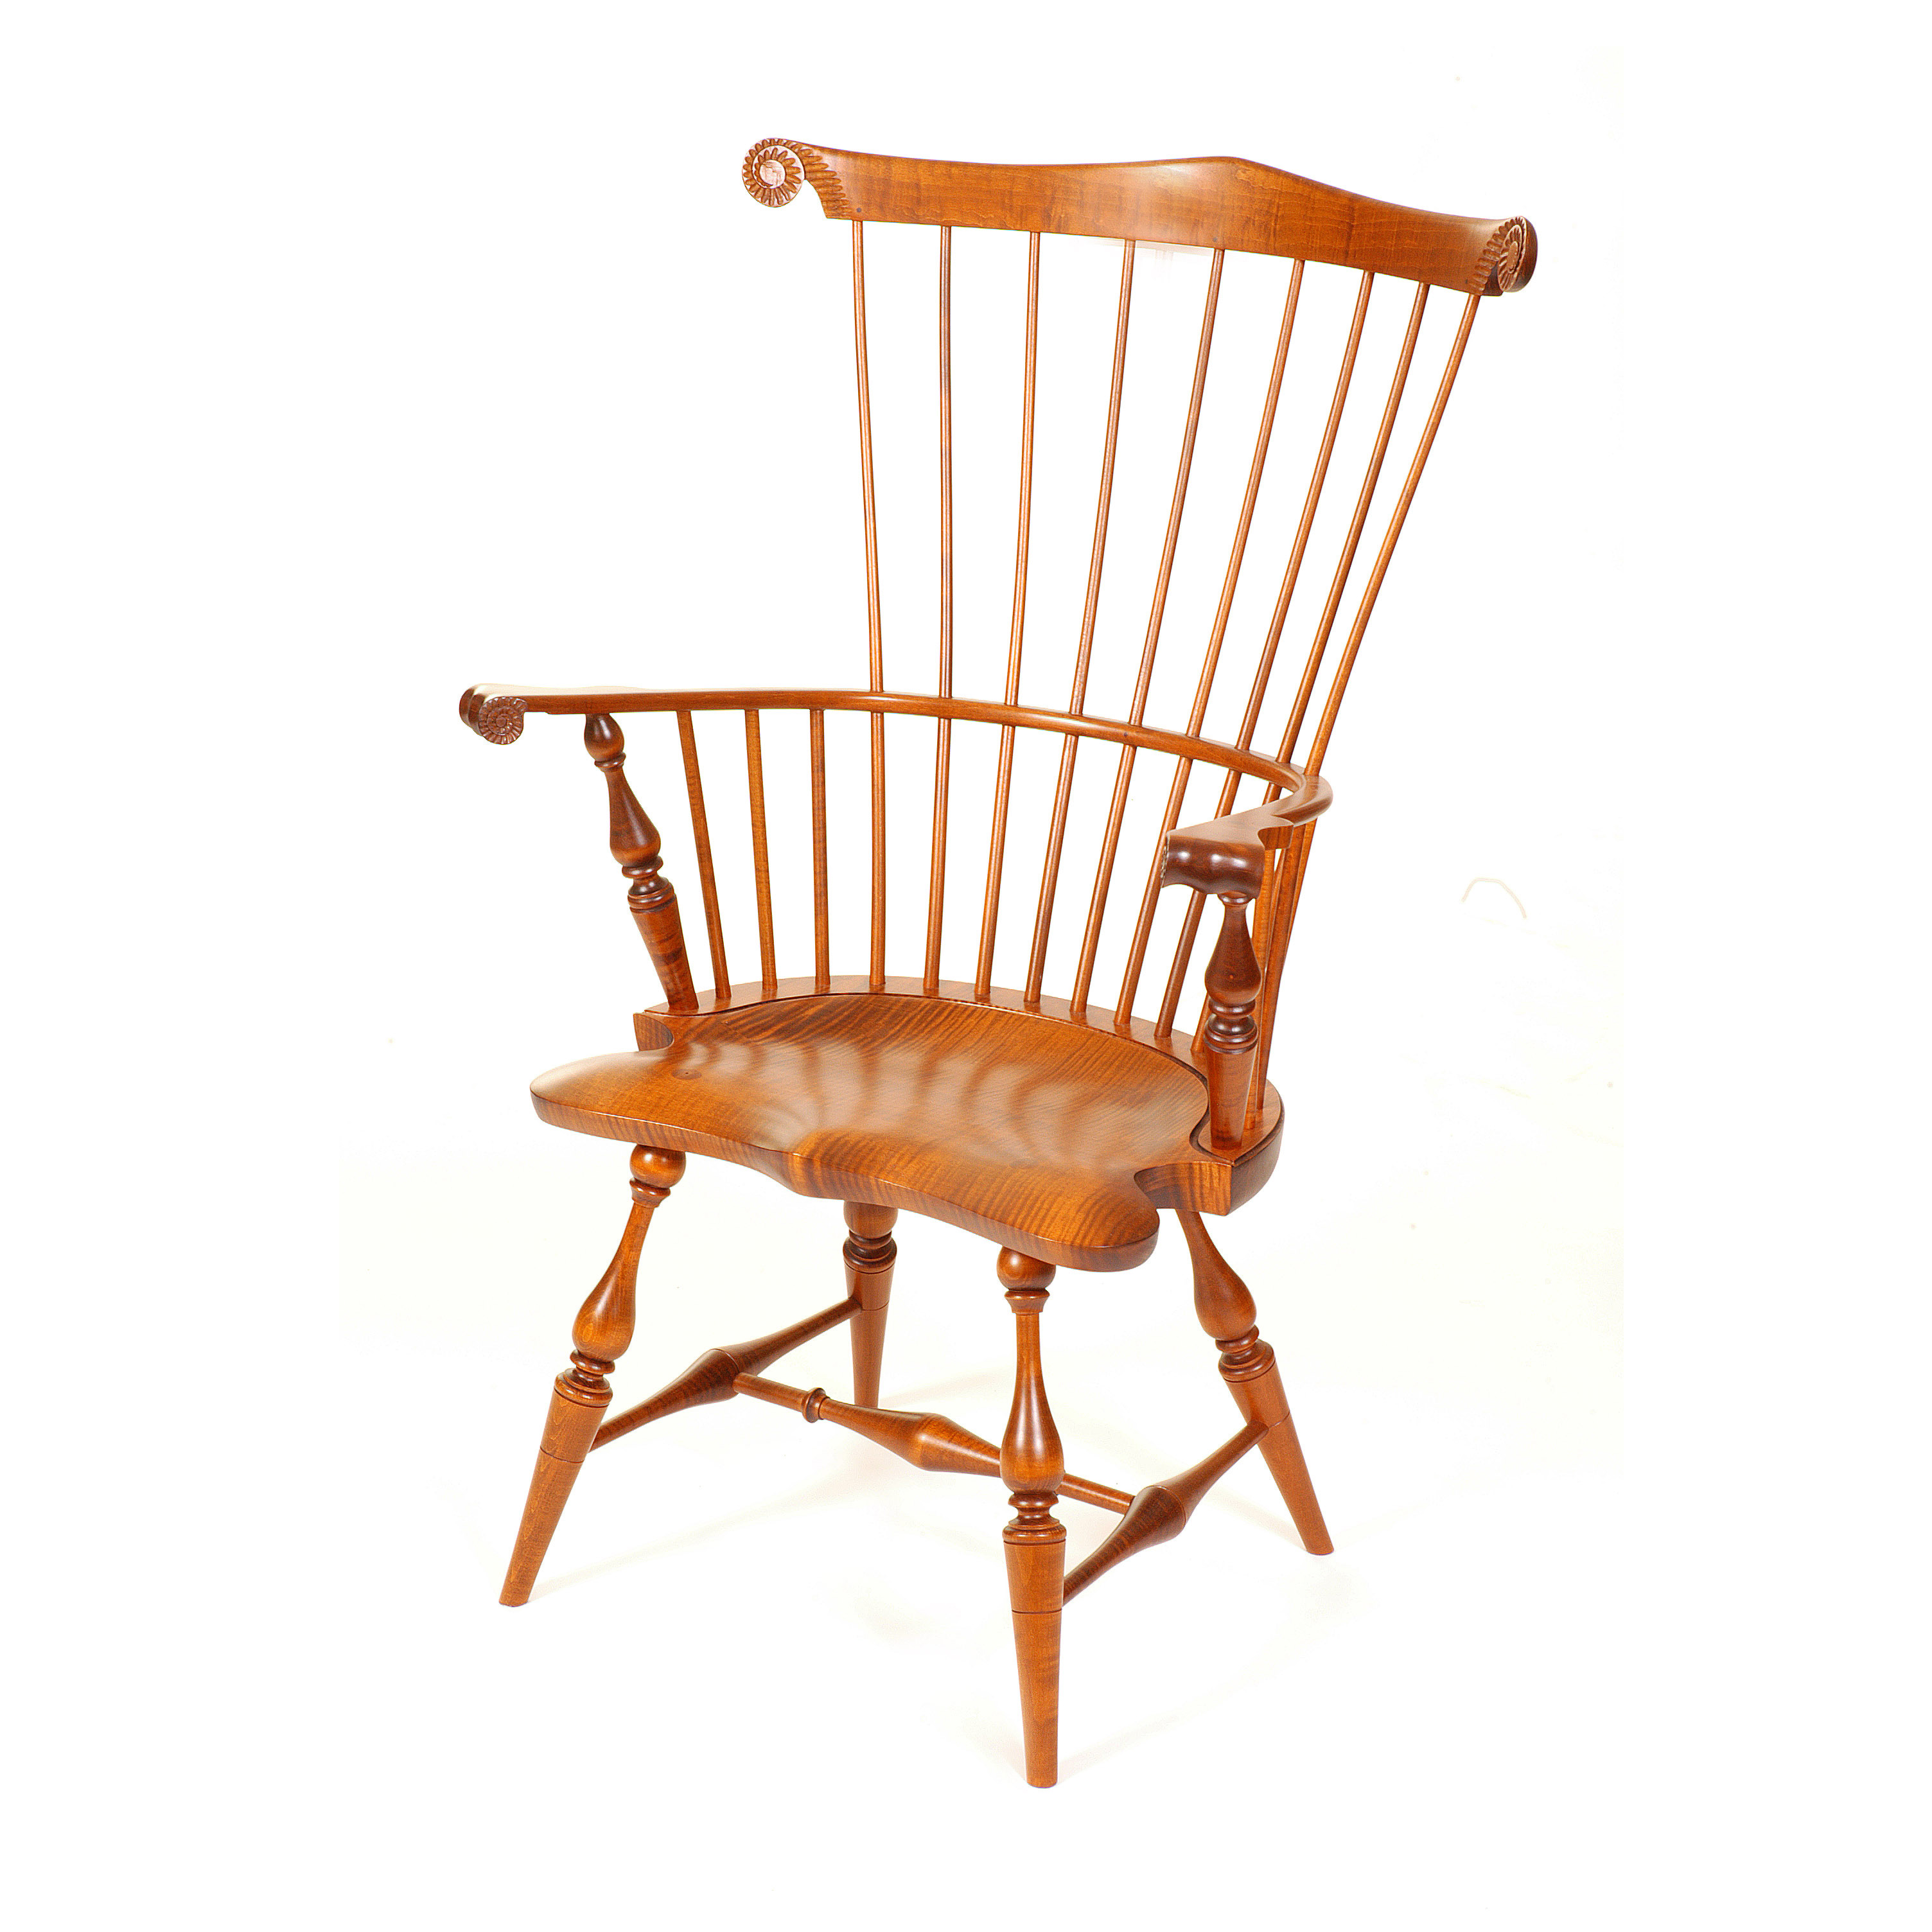 New England Comb Back Arm Chair Kit